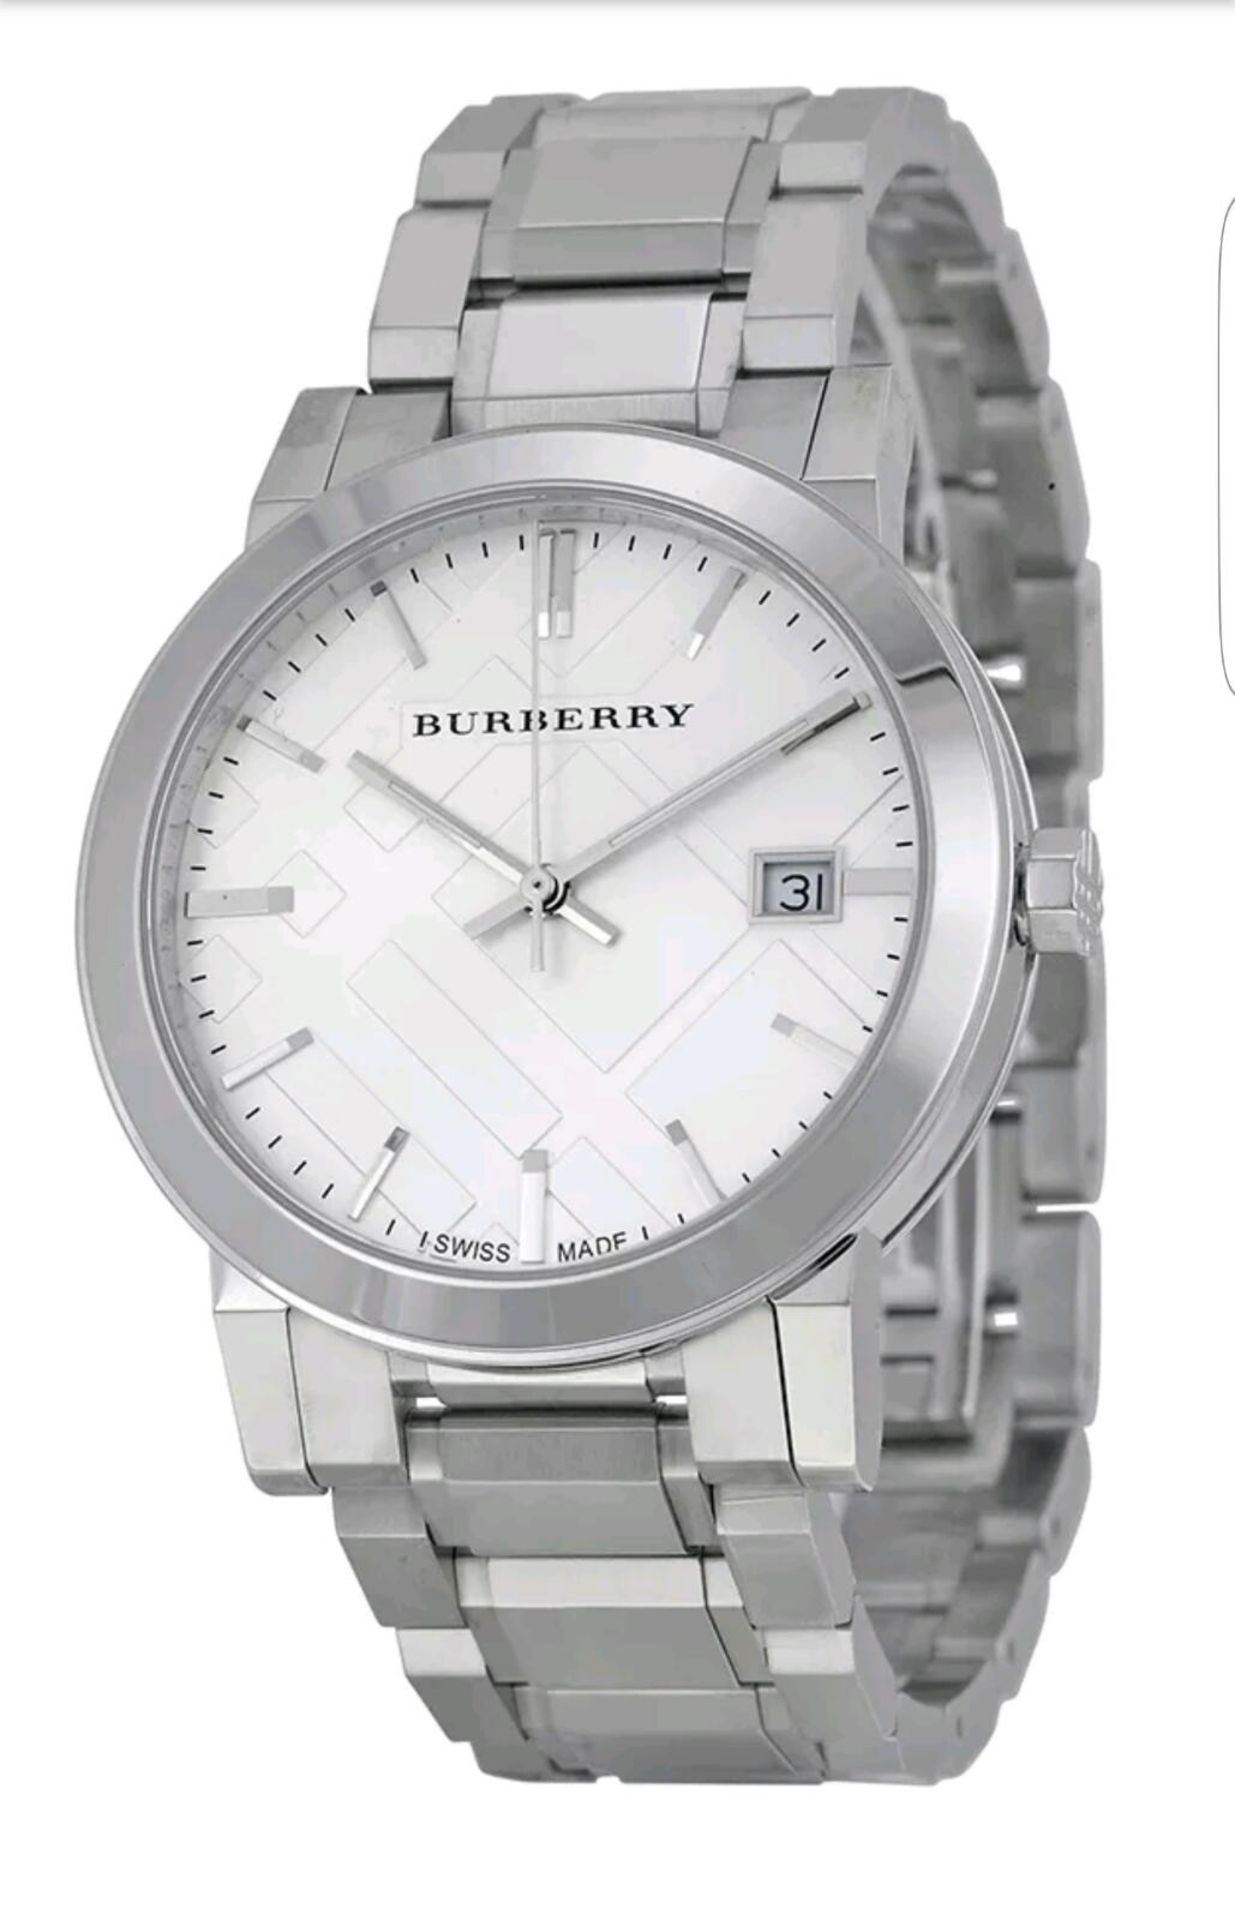 Brand new Burberry, BU9000, Gents designer watch - complete with original packaging and manual